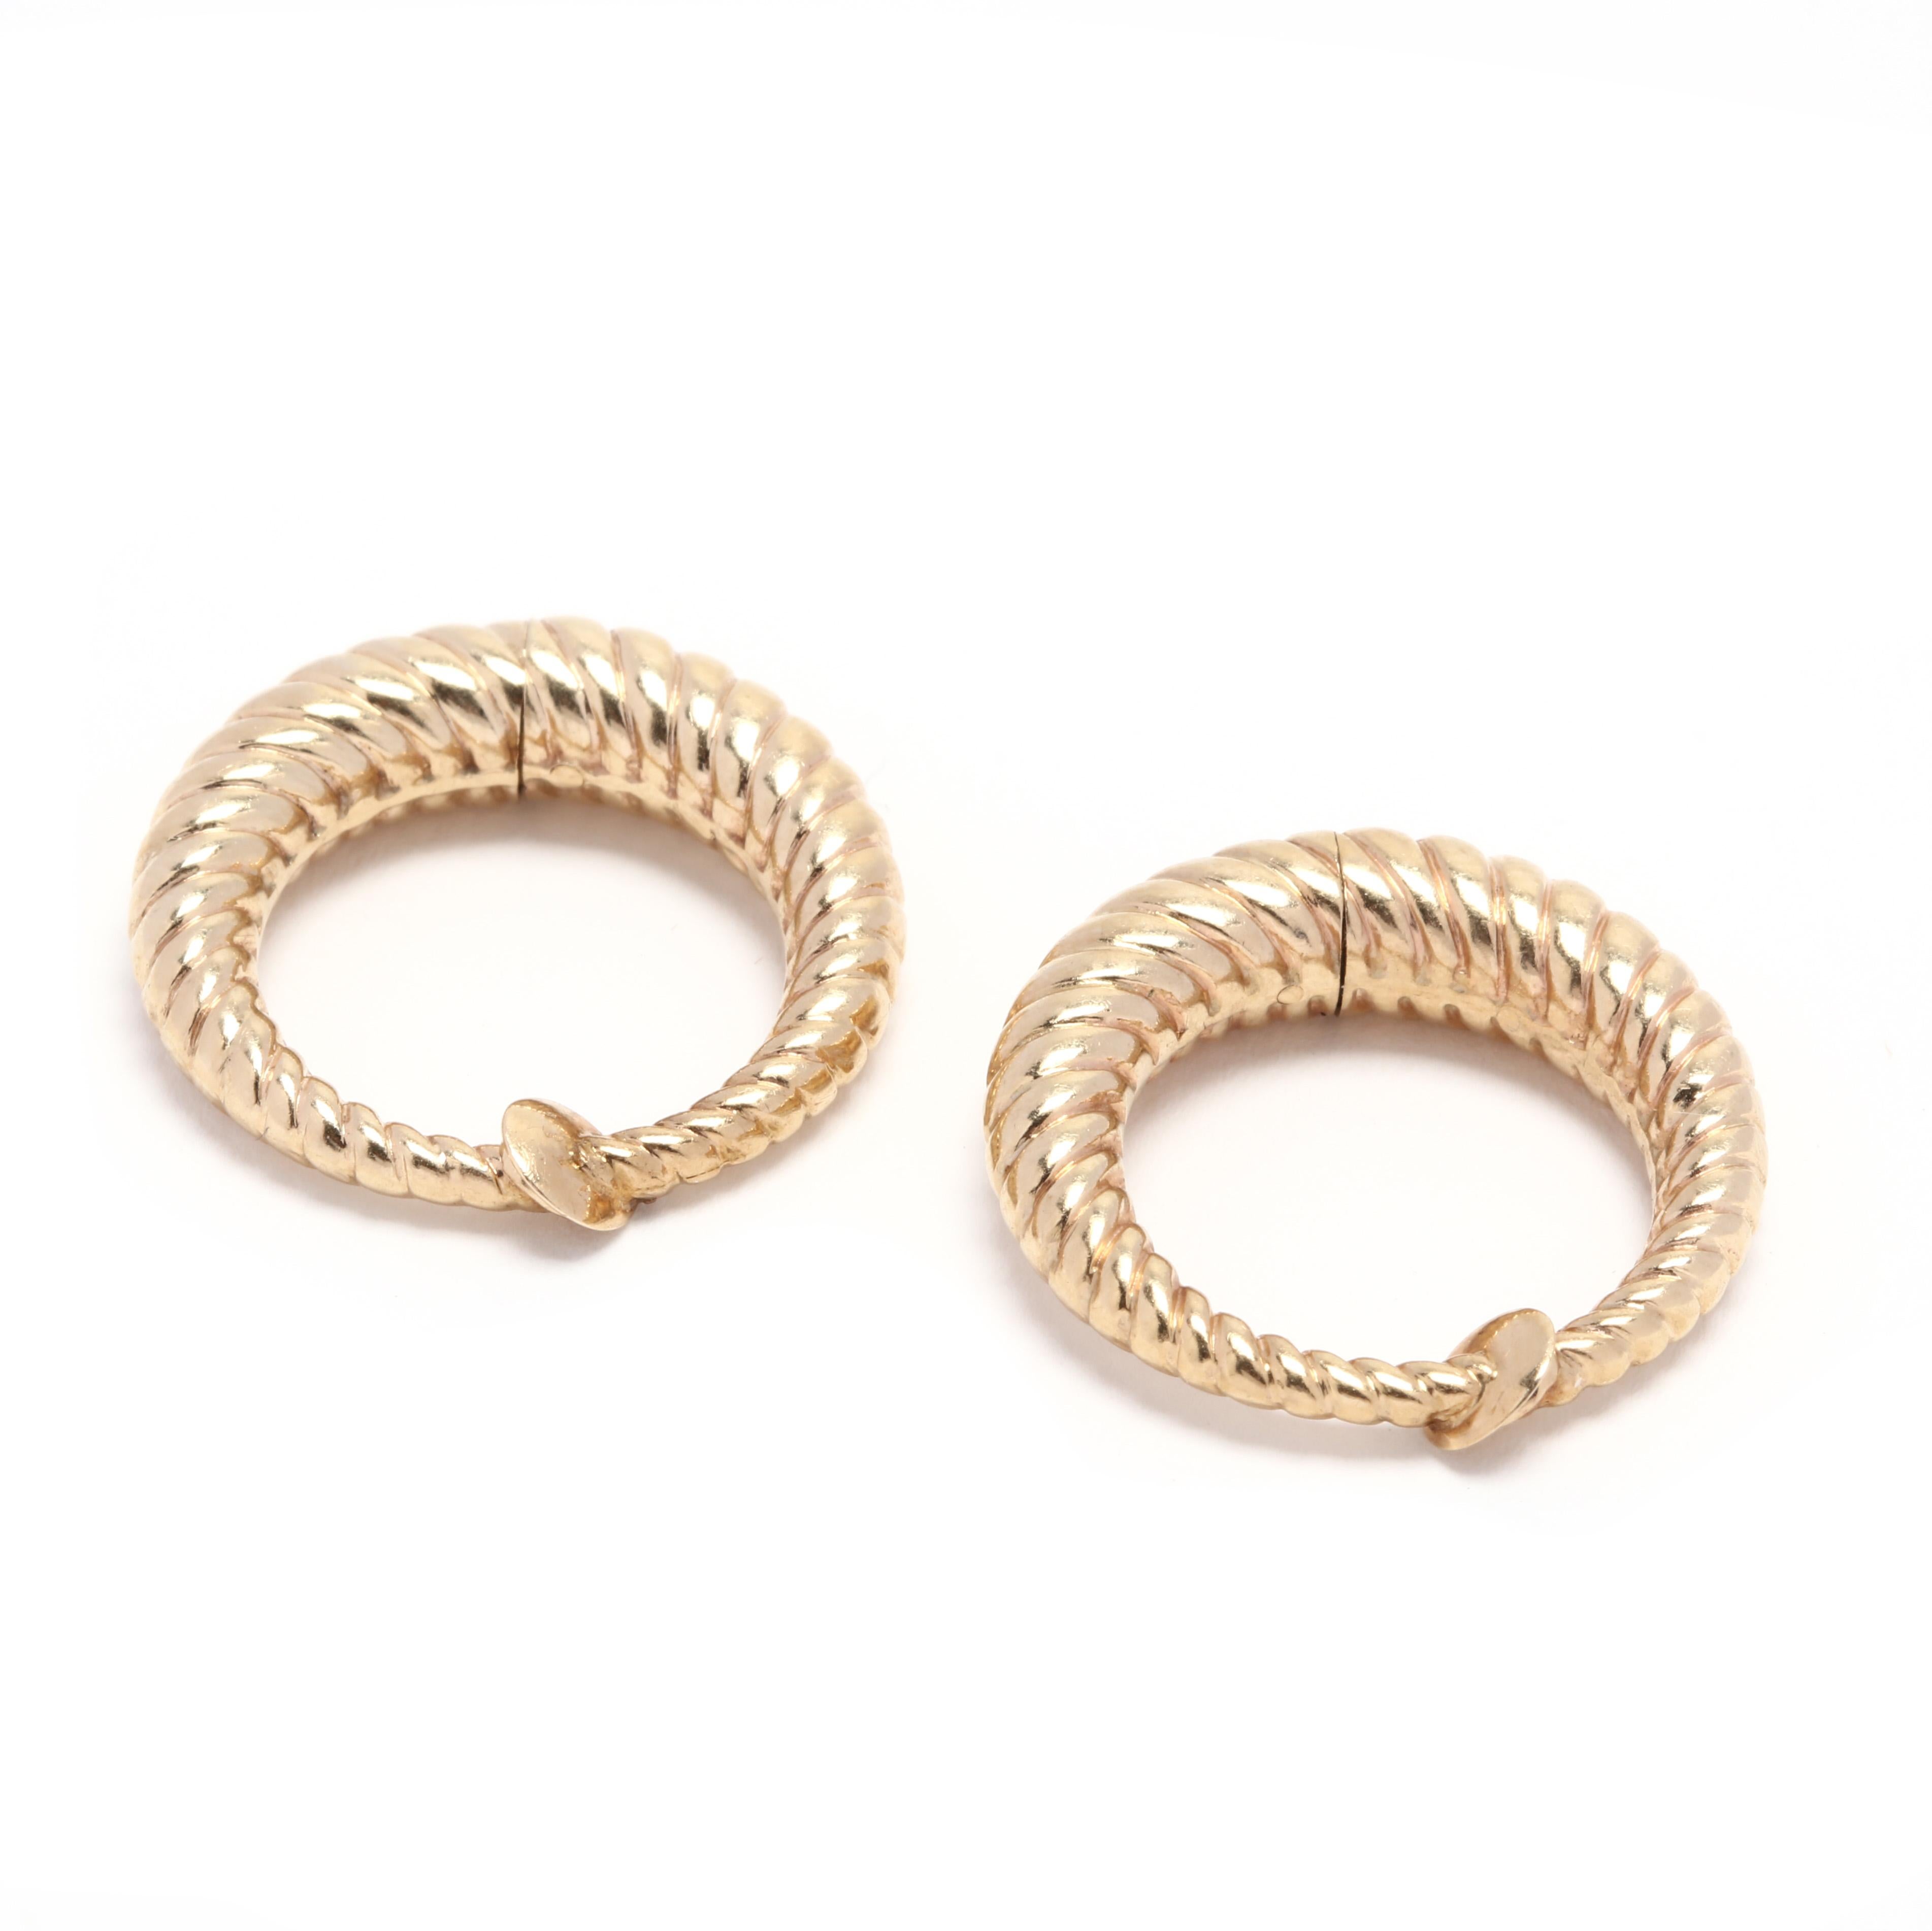 A pair of 14 karat yellow gold cable clip on hoop earrings. These earrings feature a tapered cable hoop design with a hinge at the bottom so that the top may clip on to the ear lobe.

Length: 7/8 in.

4.45 dwts.

* Please note that this is a vintage